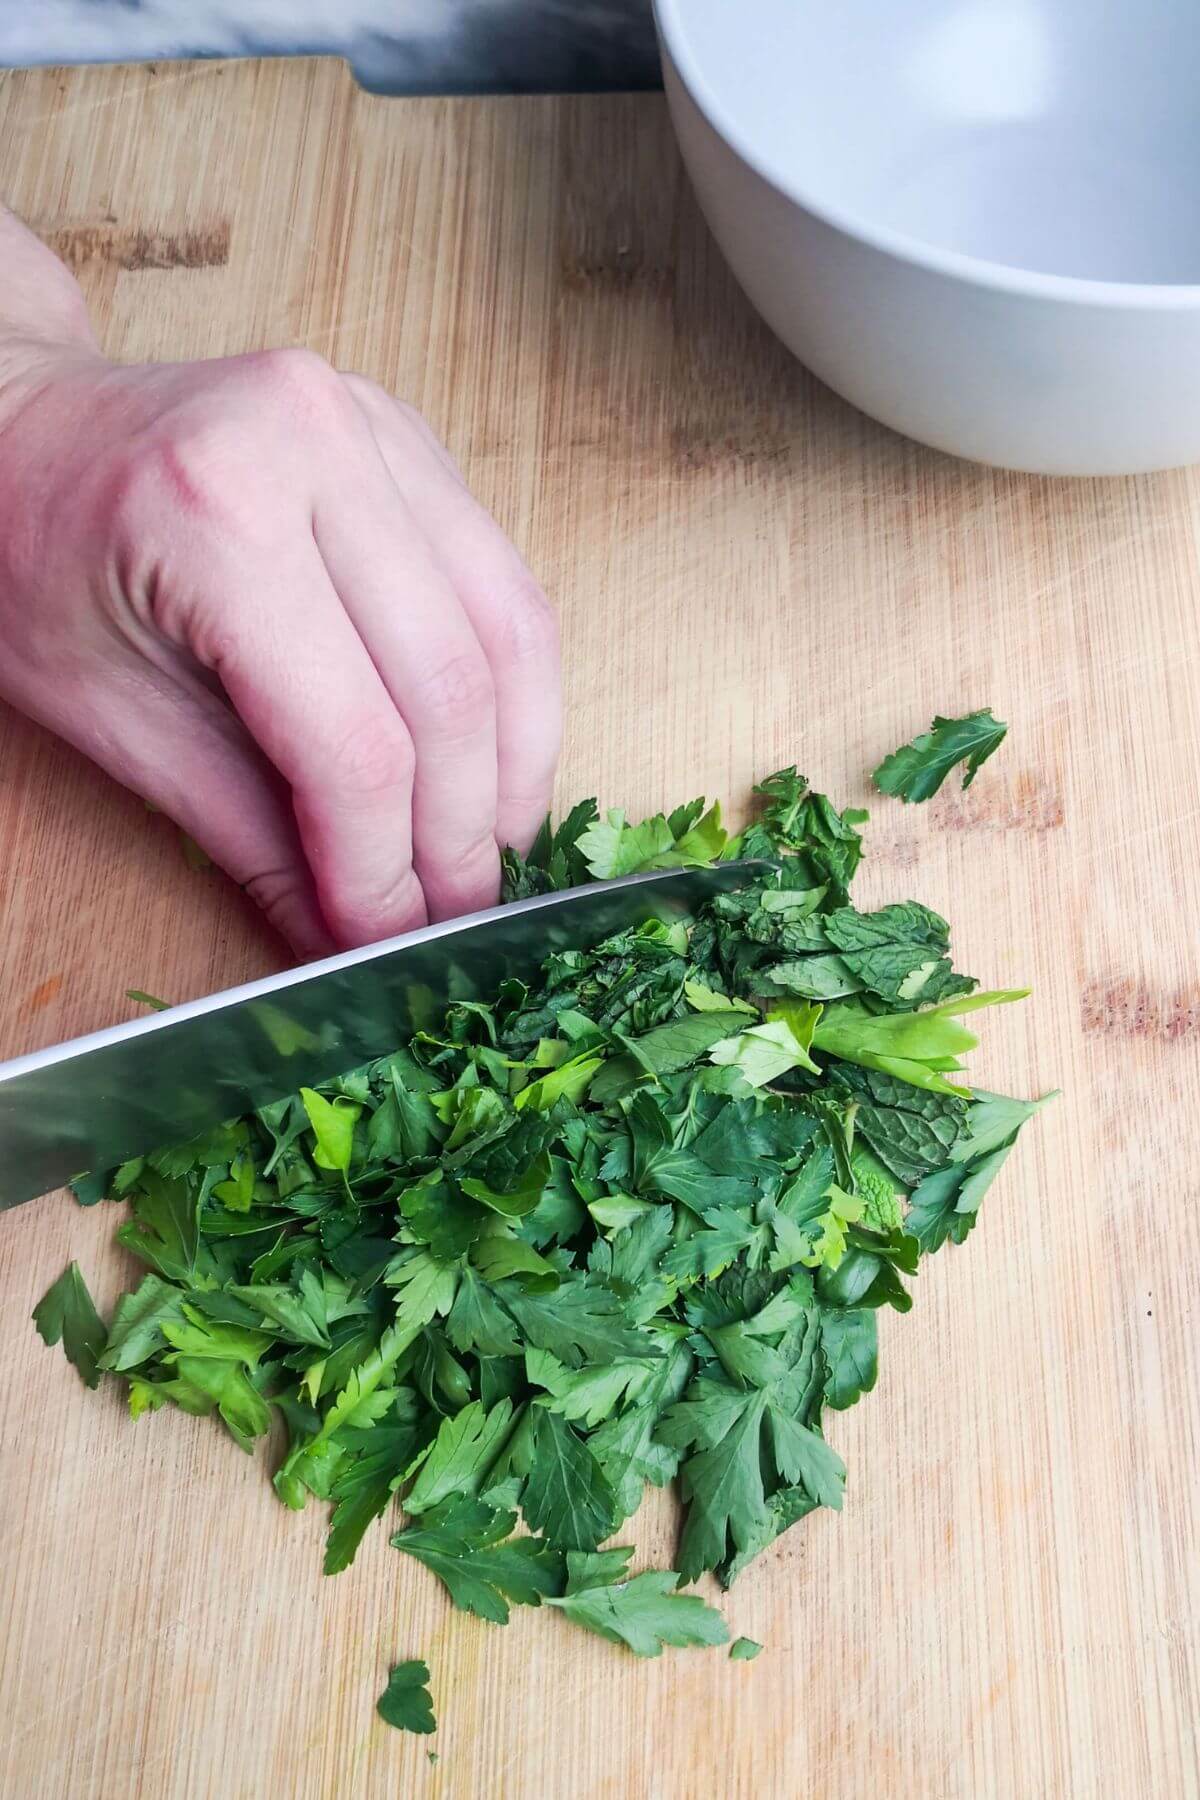 Finely chopping parsley leaves on a wooden board with a grey bowl in the background.